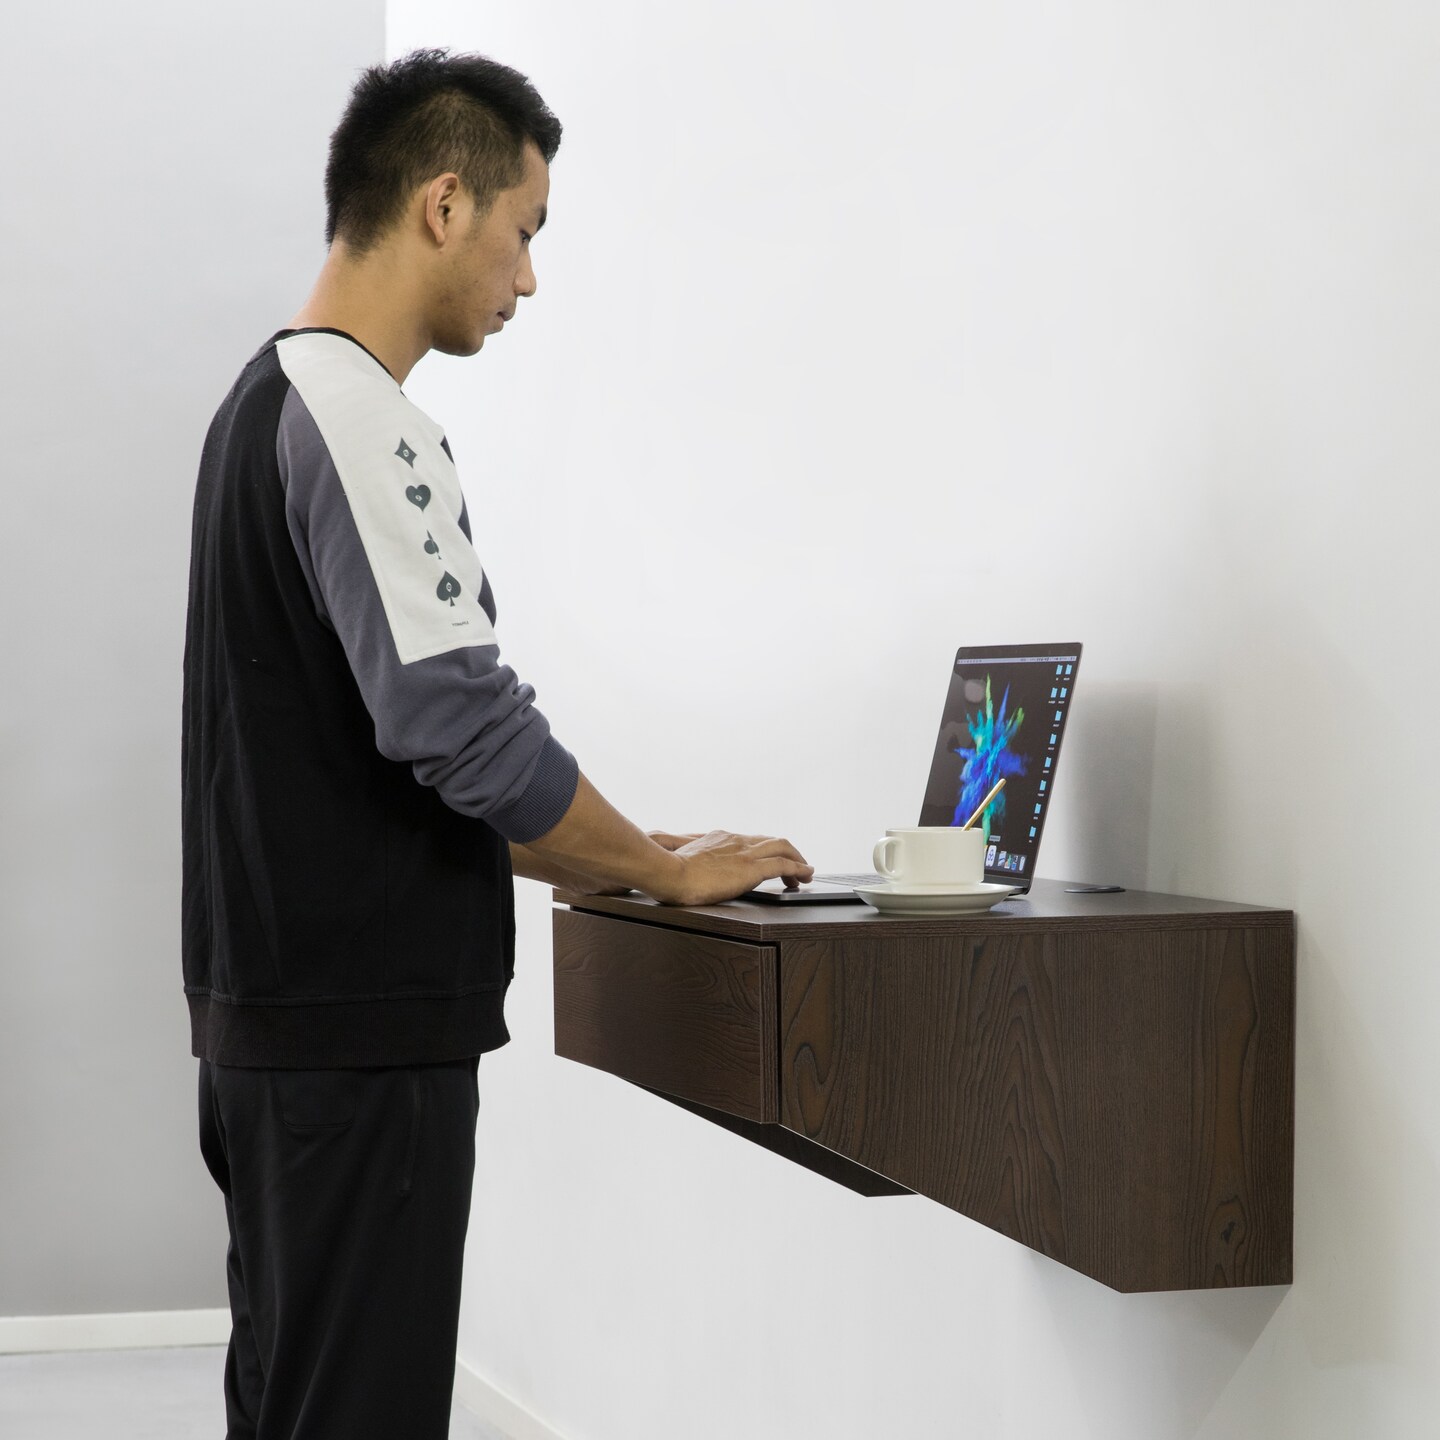 Wall Mounted Office Computer Desk with Drawer